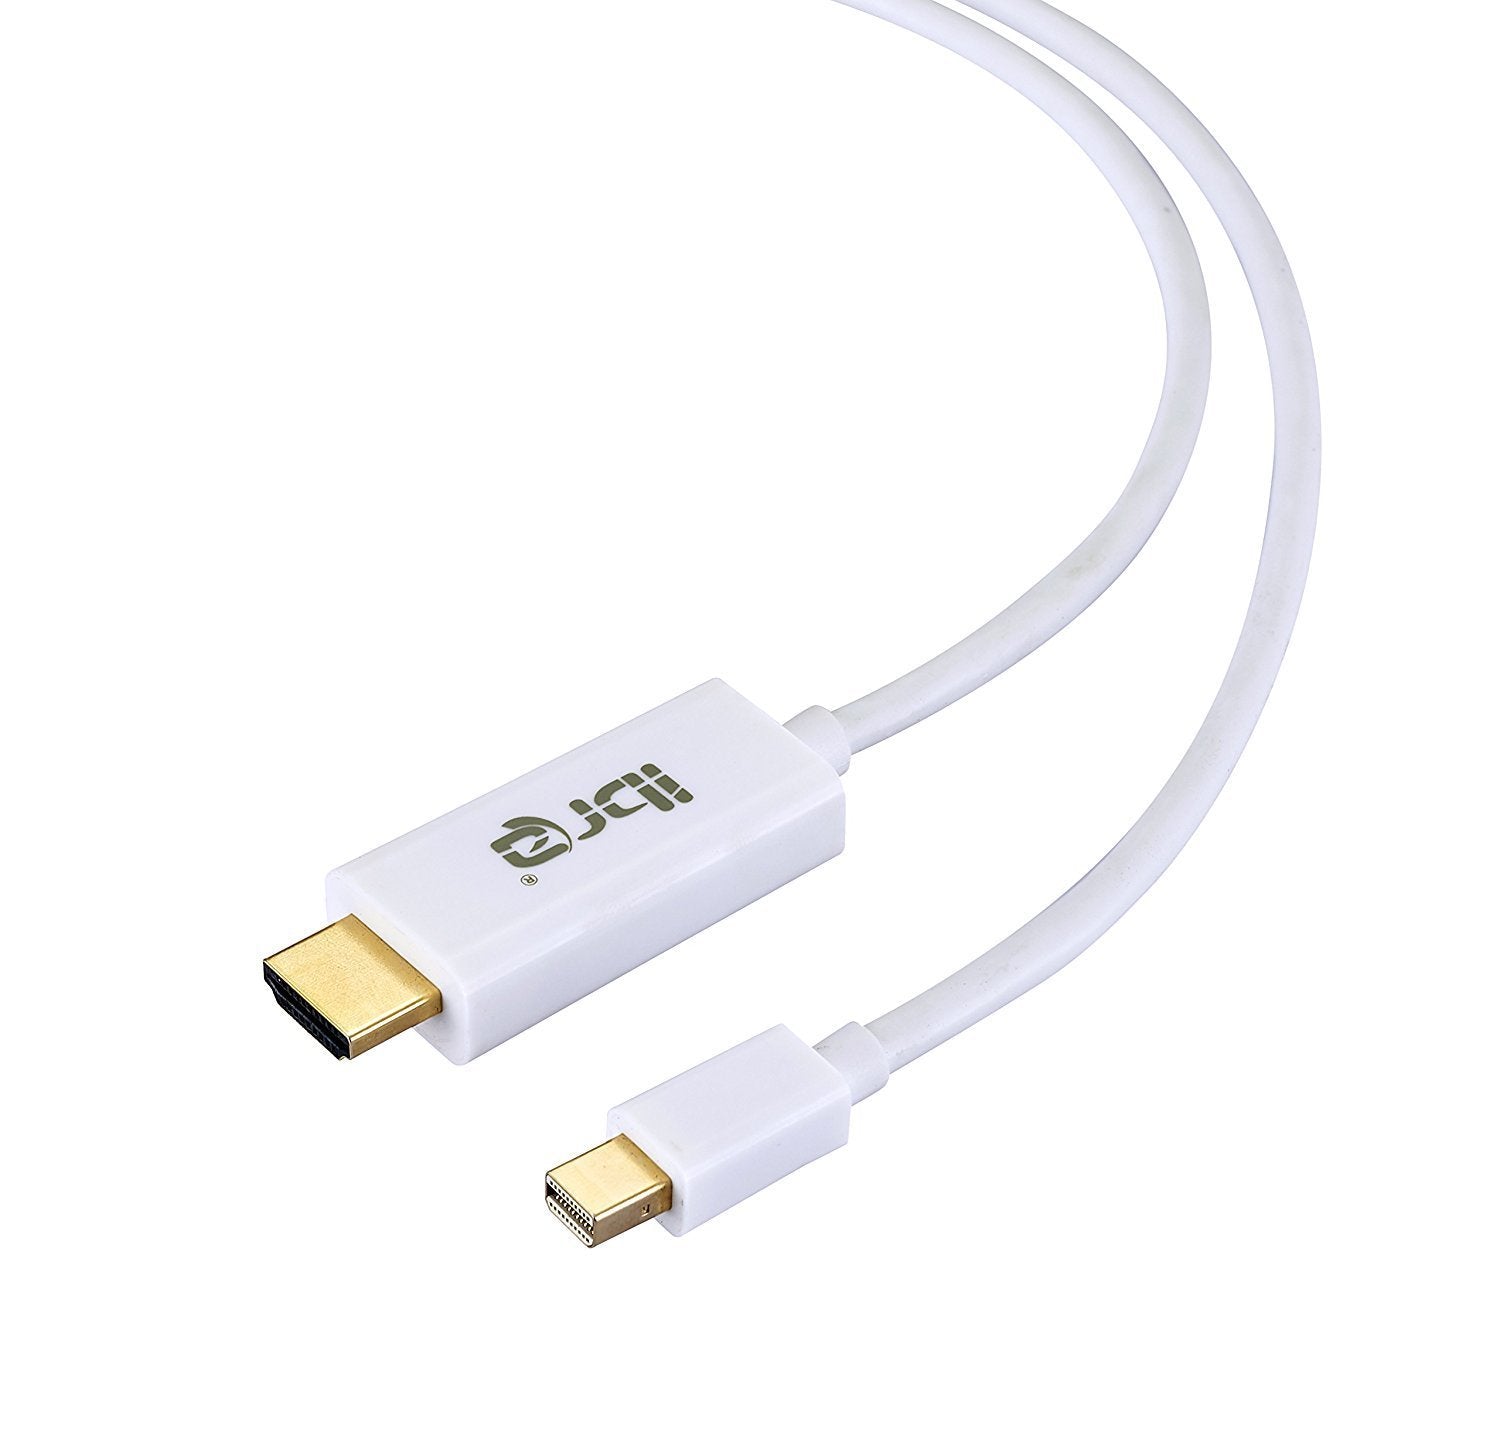 3M-IBRA Mini Display Port DP to HDMI Cable Adapter For iMac MacBook Pro Air LCD TV | Thunderbolt Compatible